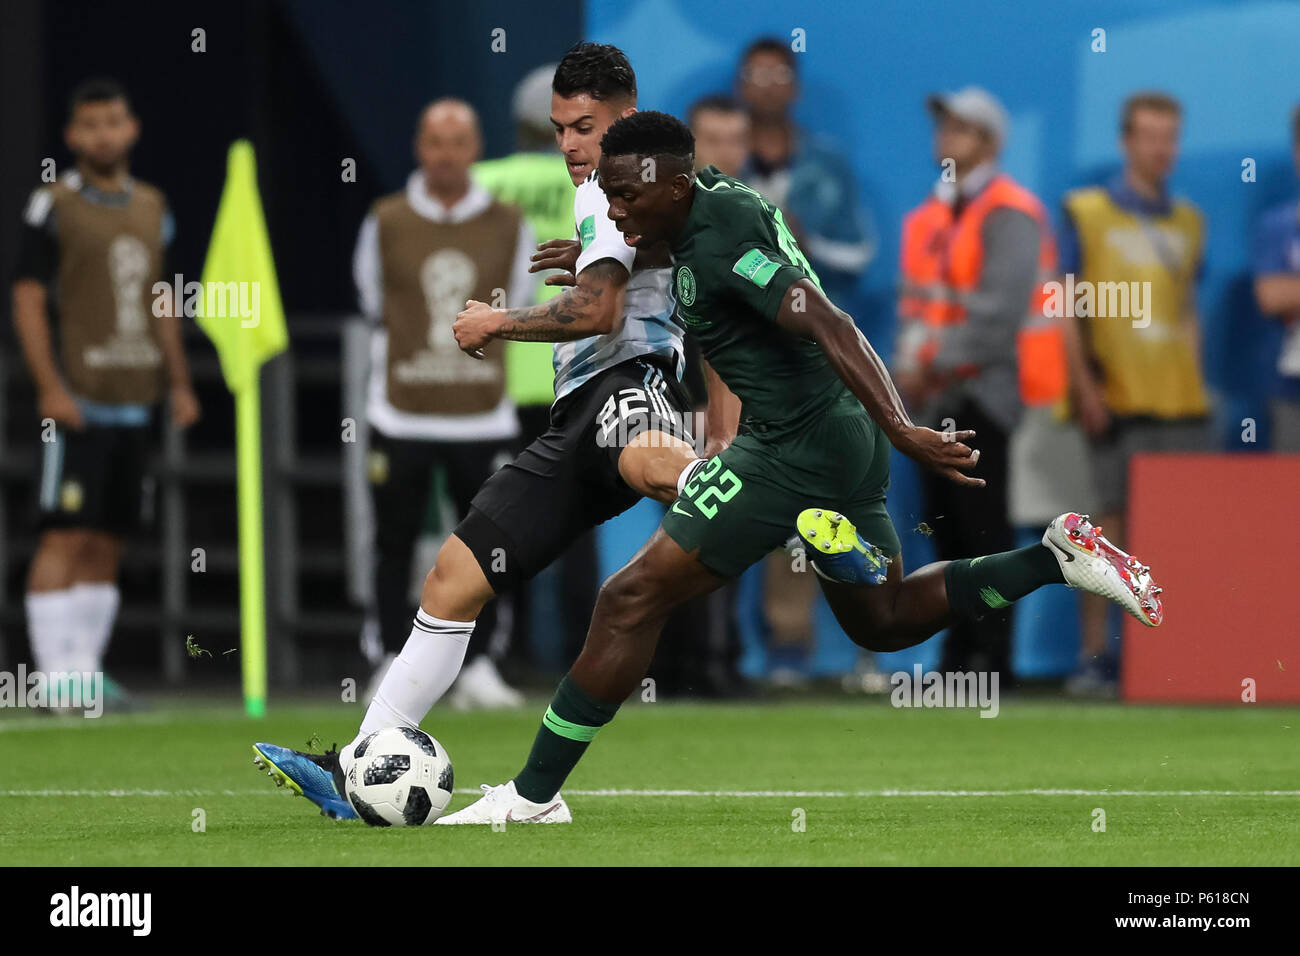 St Petersburg, Russia. 26th Jun, 2018. Cristian Pavon of Argentina and Kenneth Omeruo of Nigeria during the 2018 FIFA World Cup Group D match between Nigeria and Argentina at Saint Petersburg Stadium on June 26th 2018 in Saint Petersburg, Russia. (Photo by Daniel Chesterton/phcimages.com) Credit: PHC Images/Alamy Live News Stock Photo